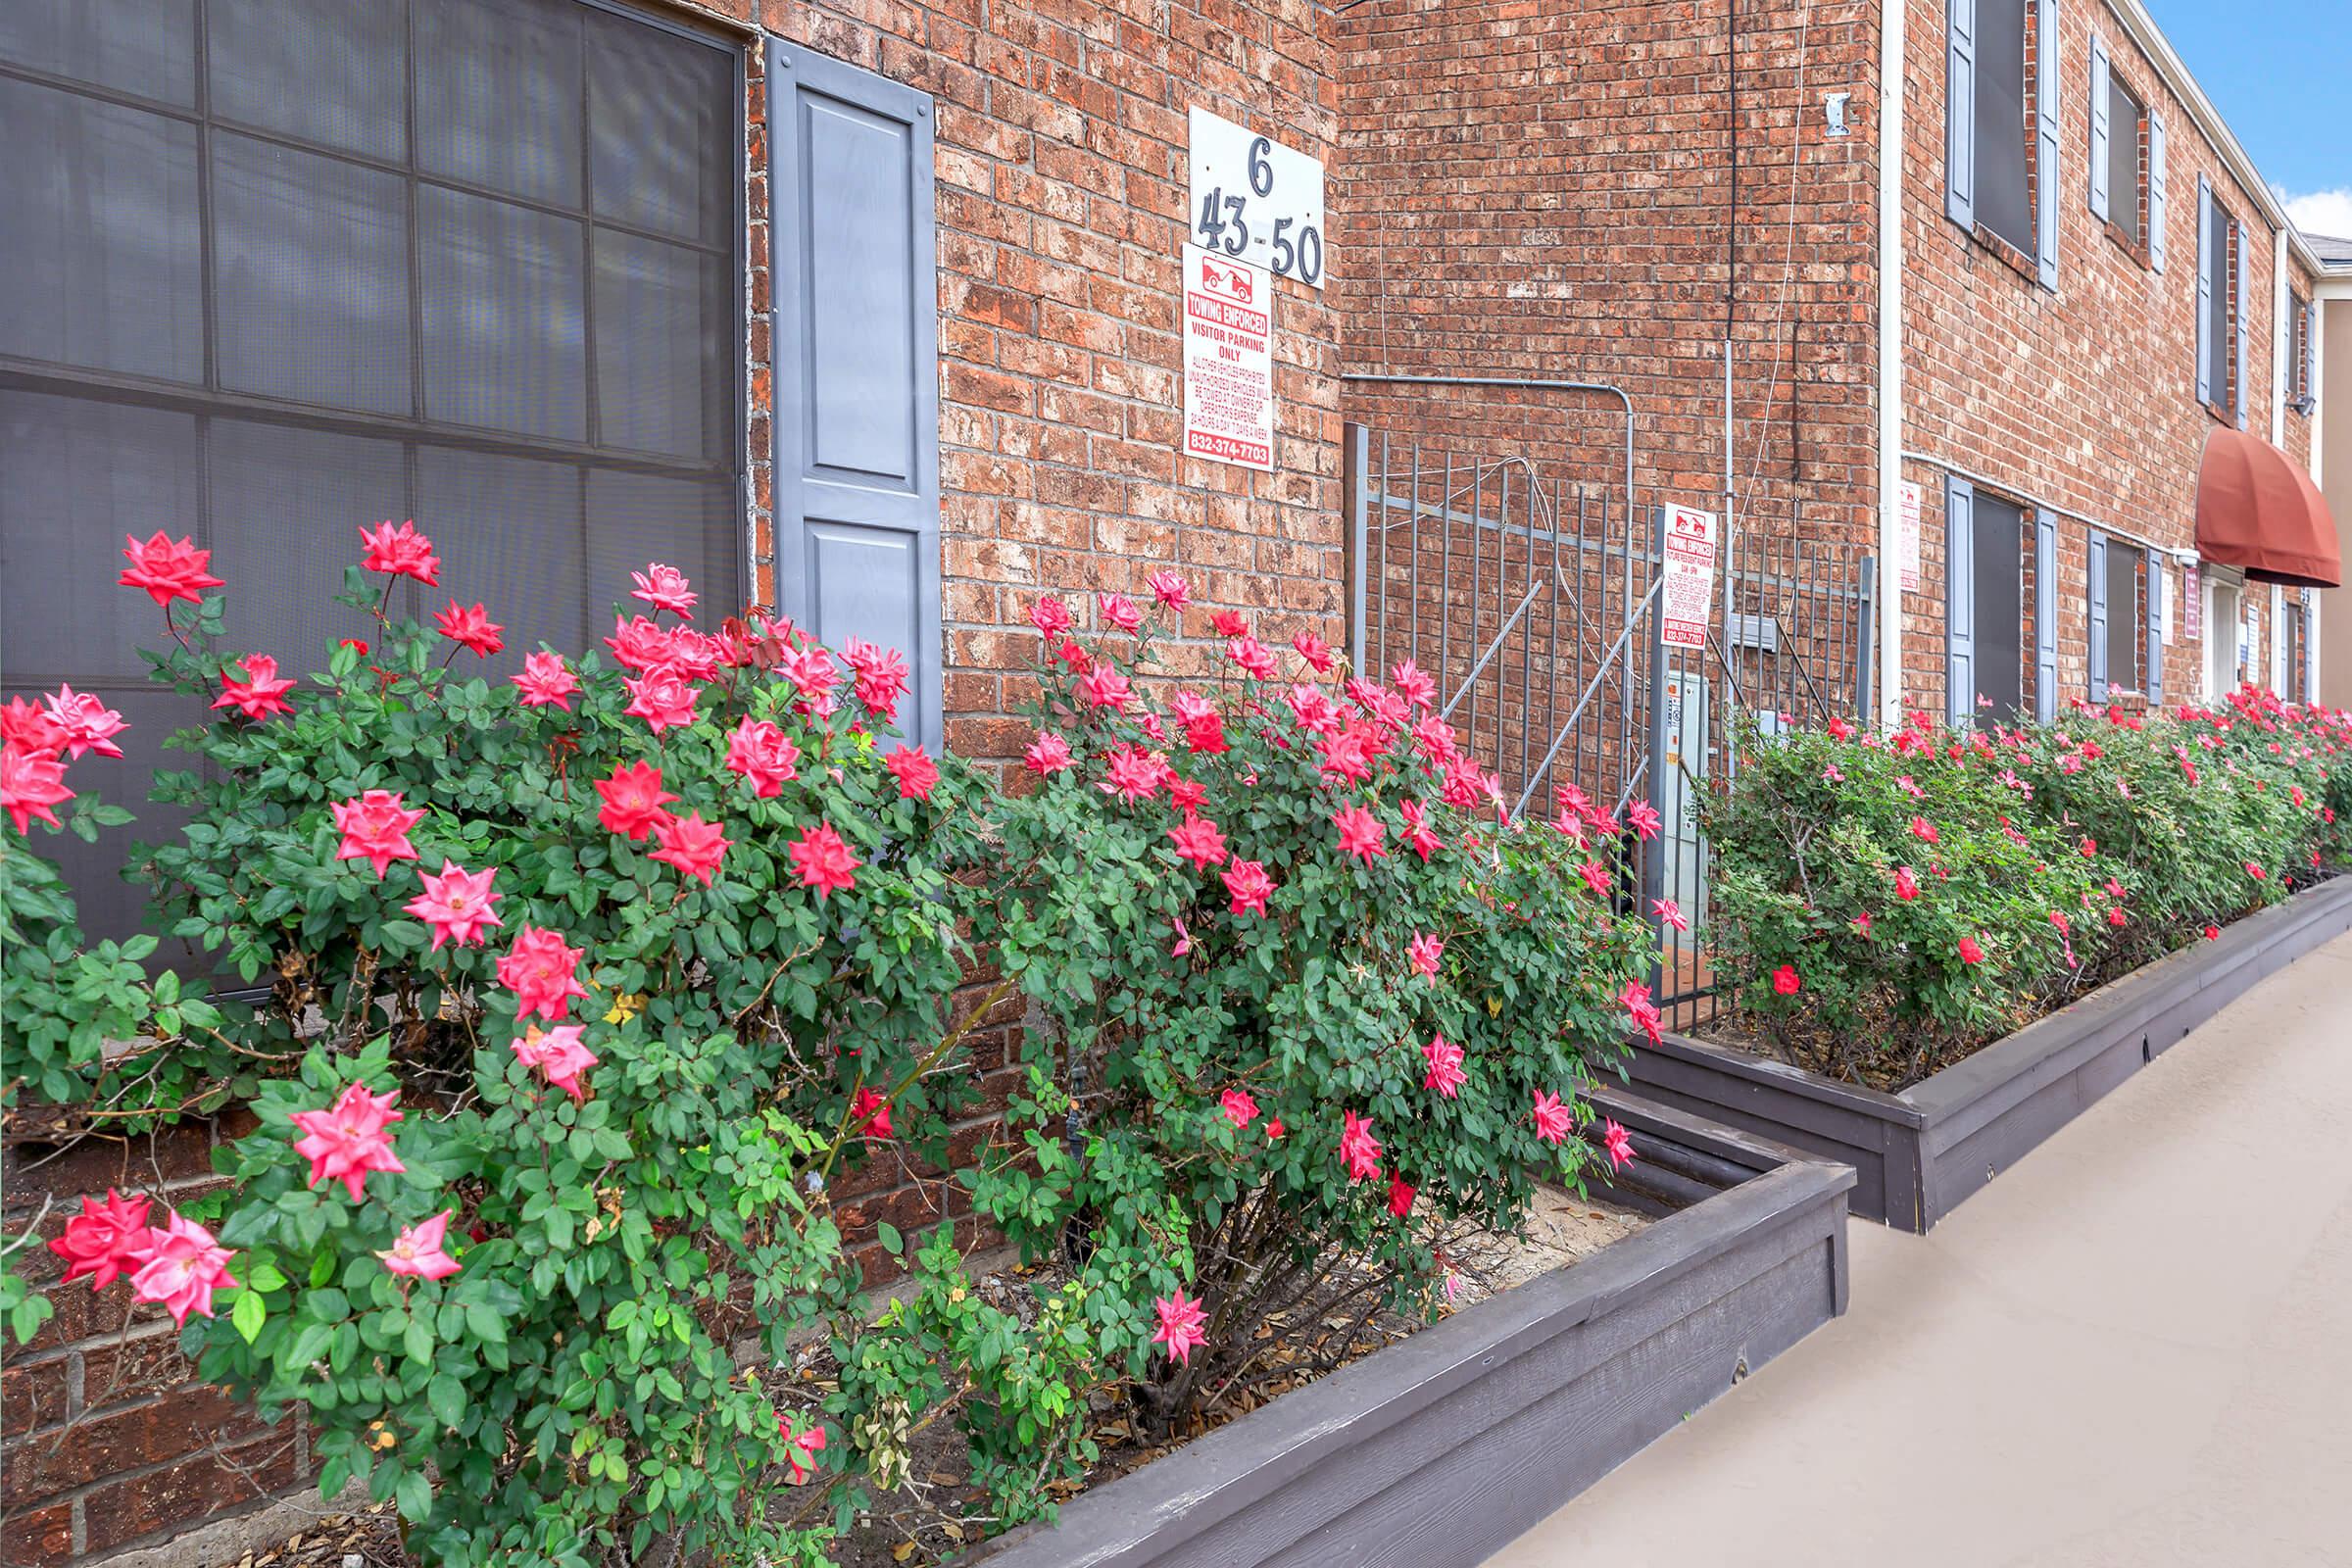 a colorful flower garden in front of a brick building